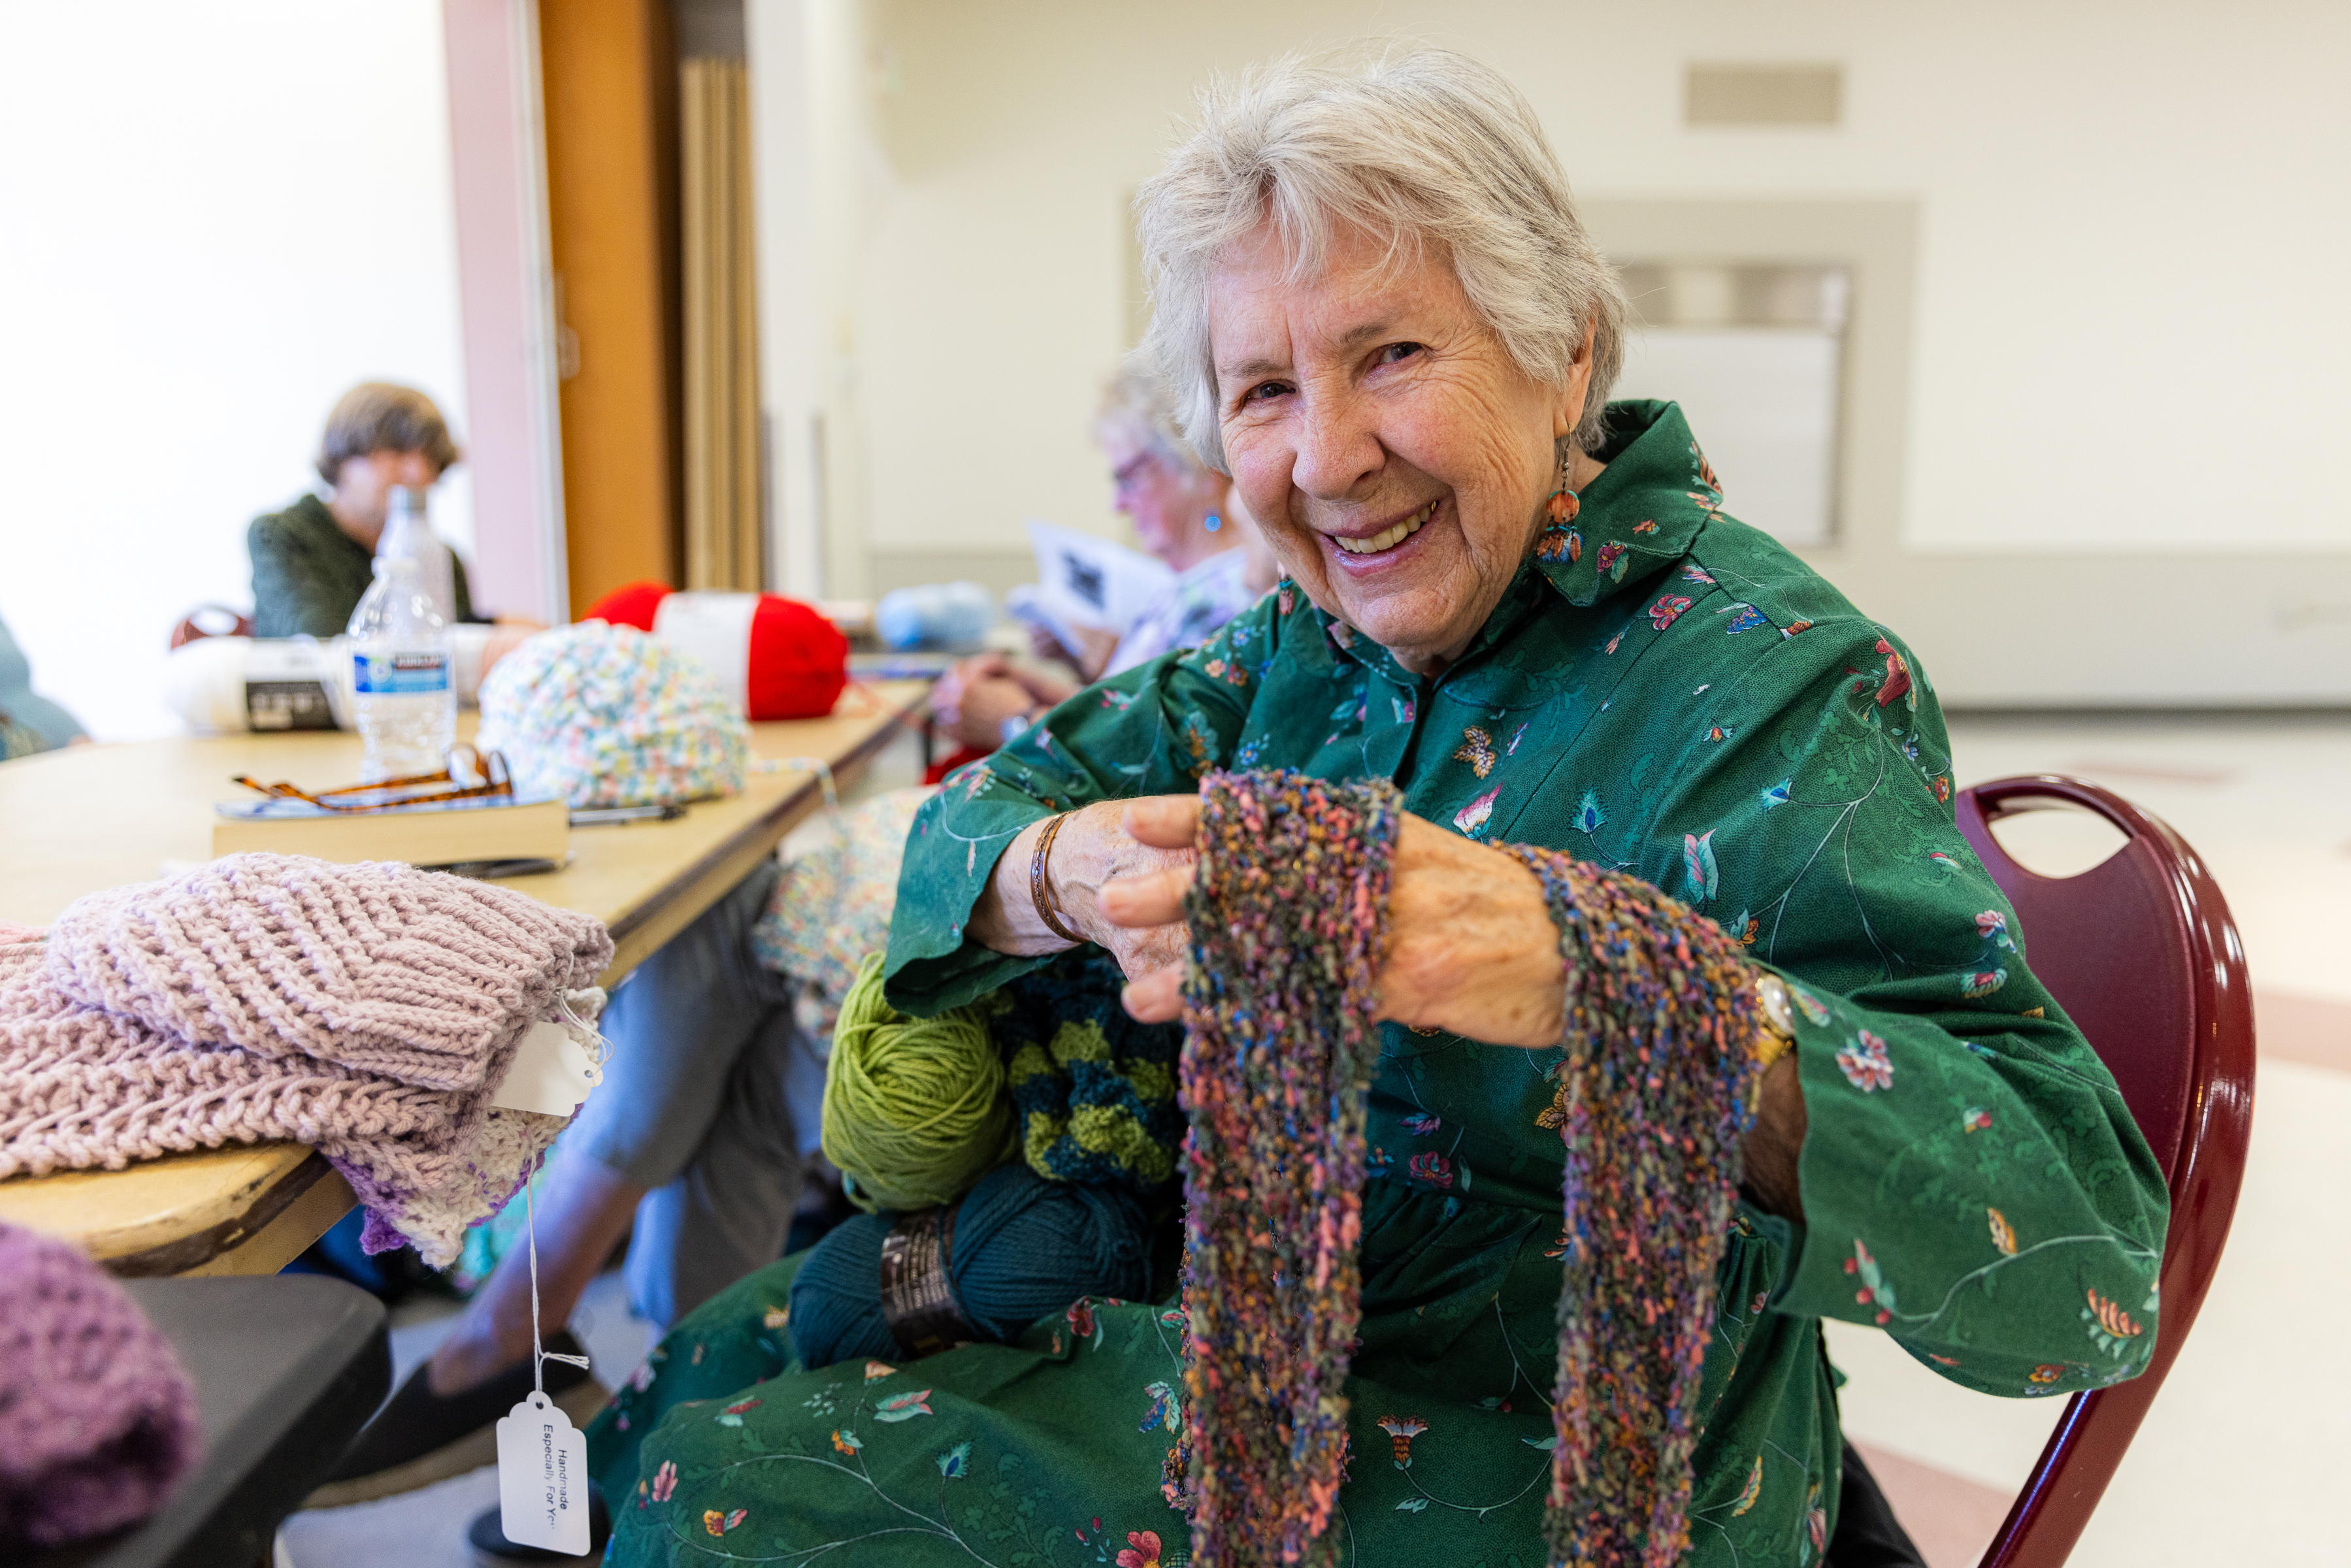 Knitting Club member shows off a scarf they made